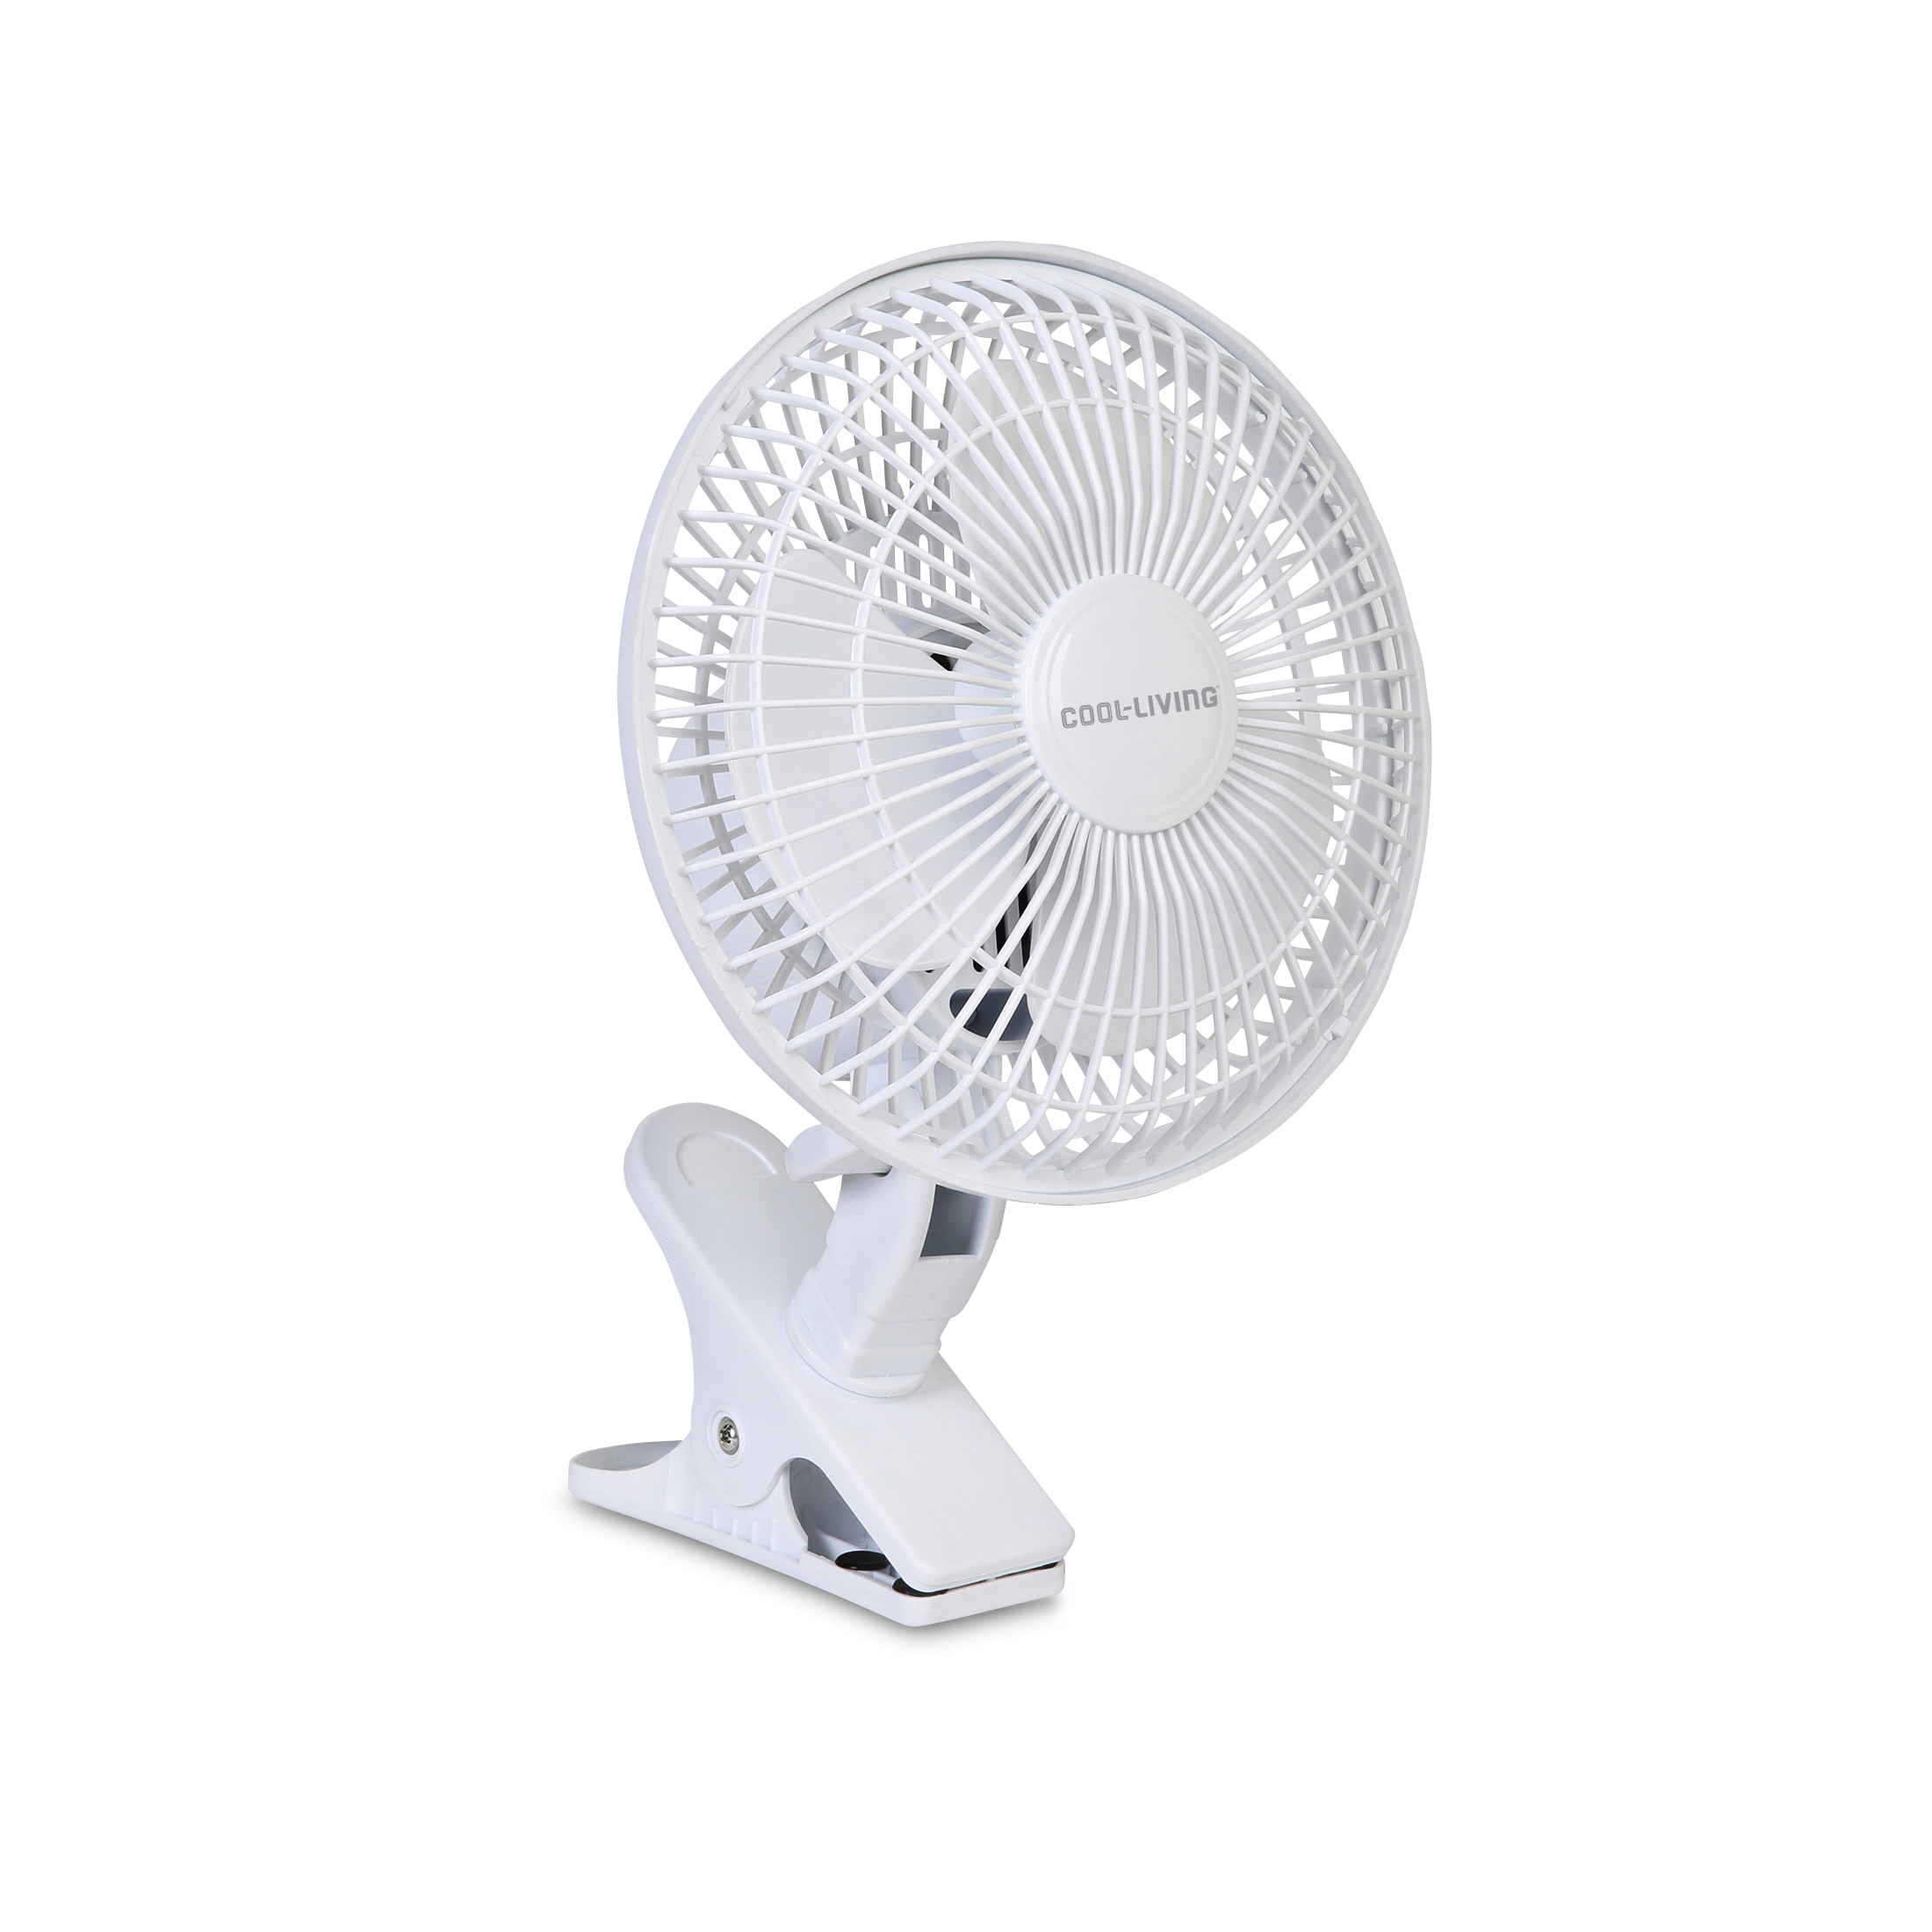 2 Speed Clip-on Fan 6 inch, with Strong Clamp, Powerful Airflow & Adjustable Tilt